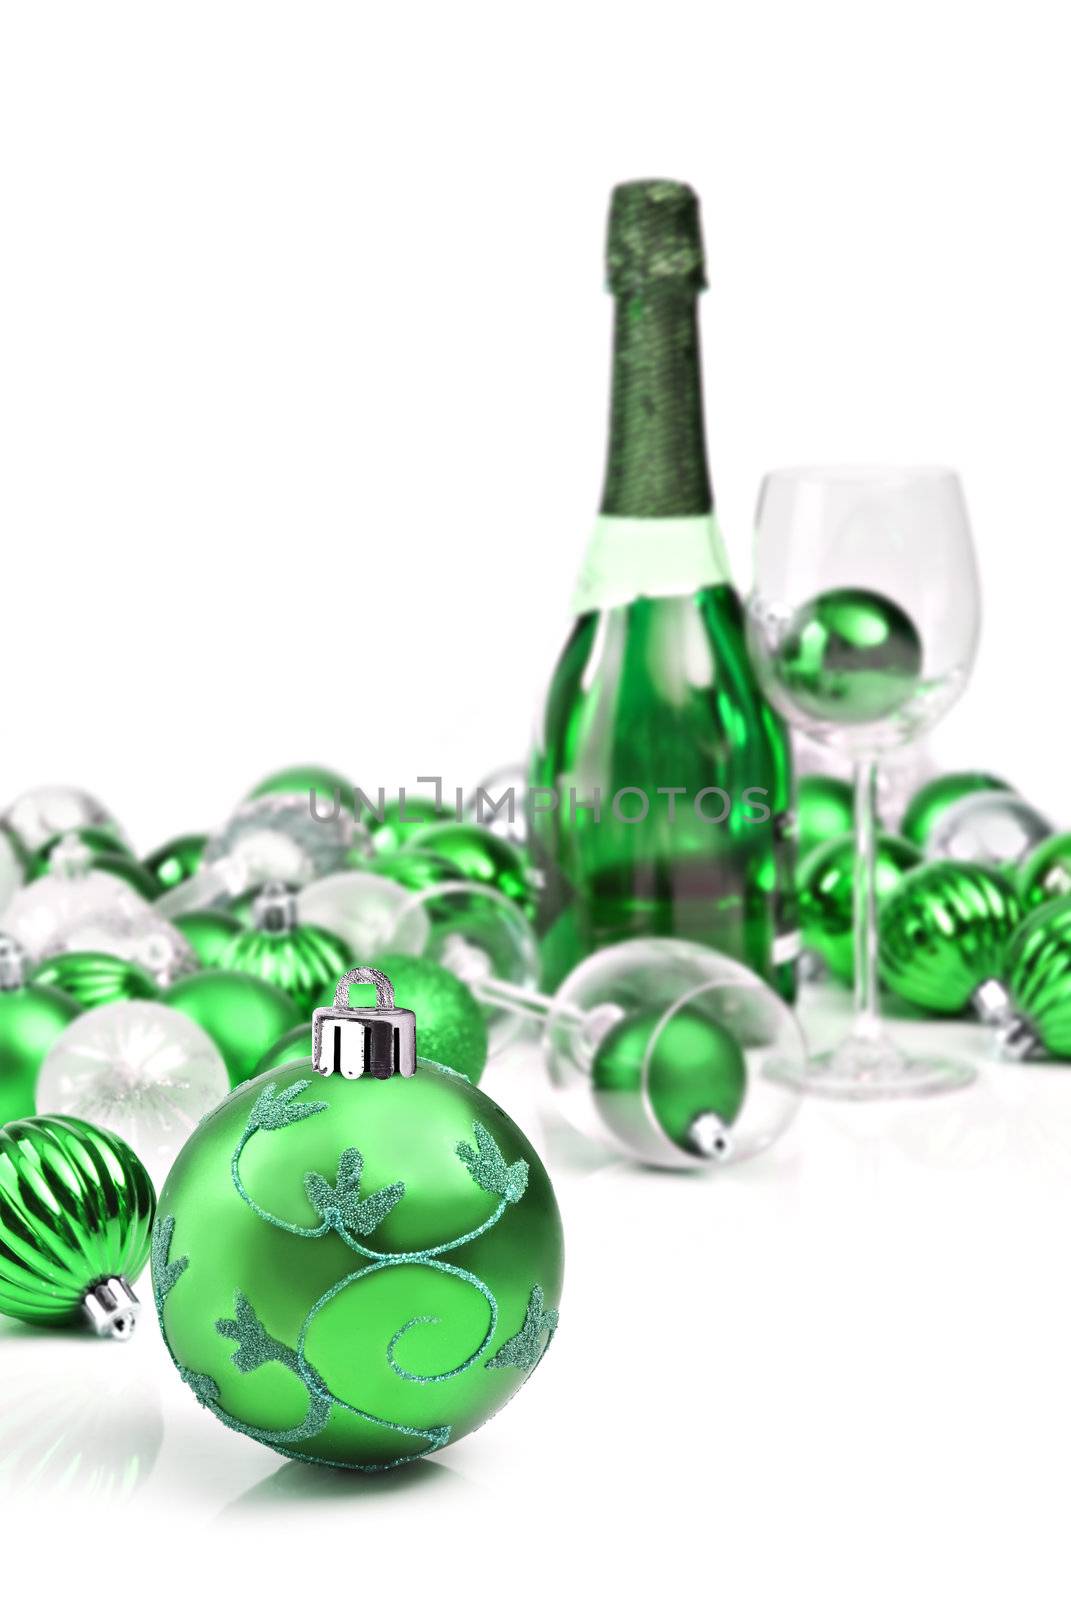 Green christmas ornaments with wine